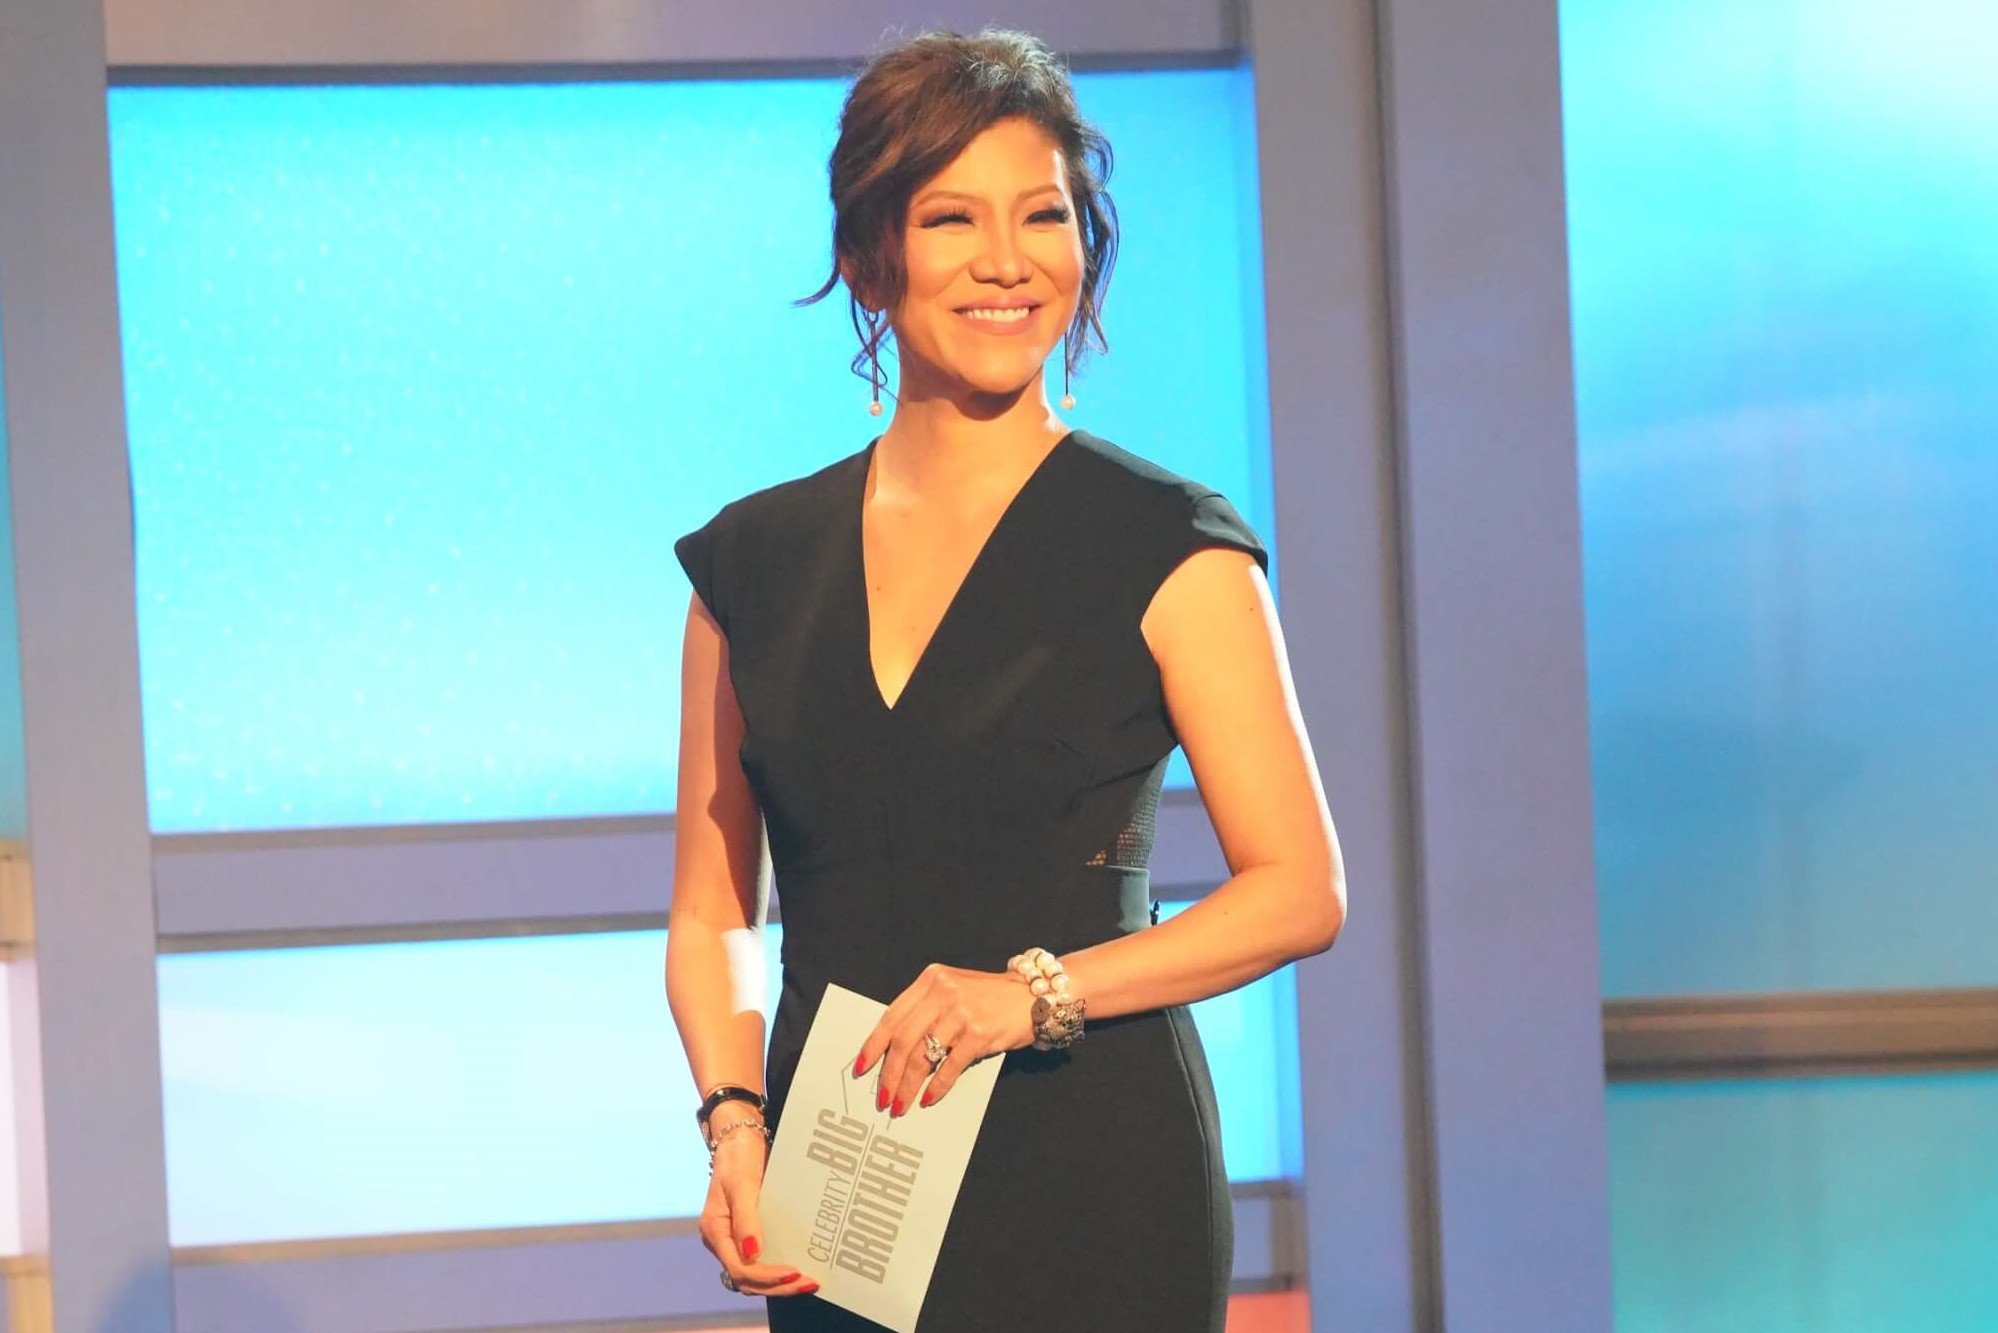 Julie Chen Moonves, the host of every season of 'Big Brother' on CBS, appears onstage in a black dress holding an envelope with 'Big Brother's' logo on it.